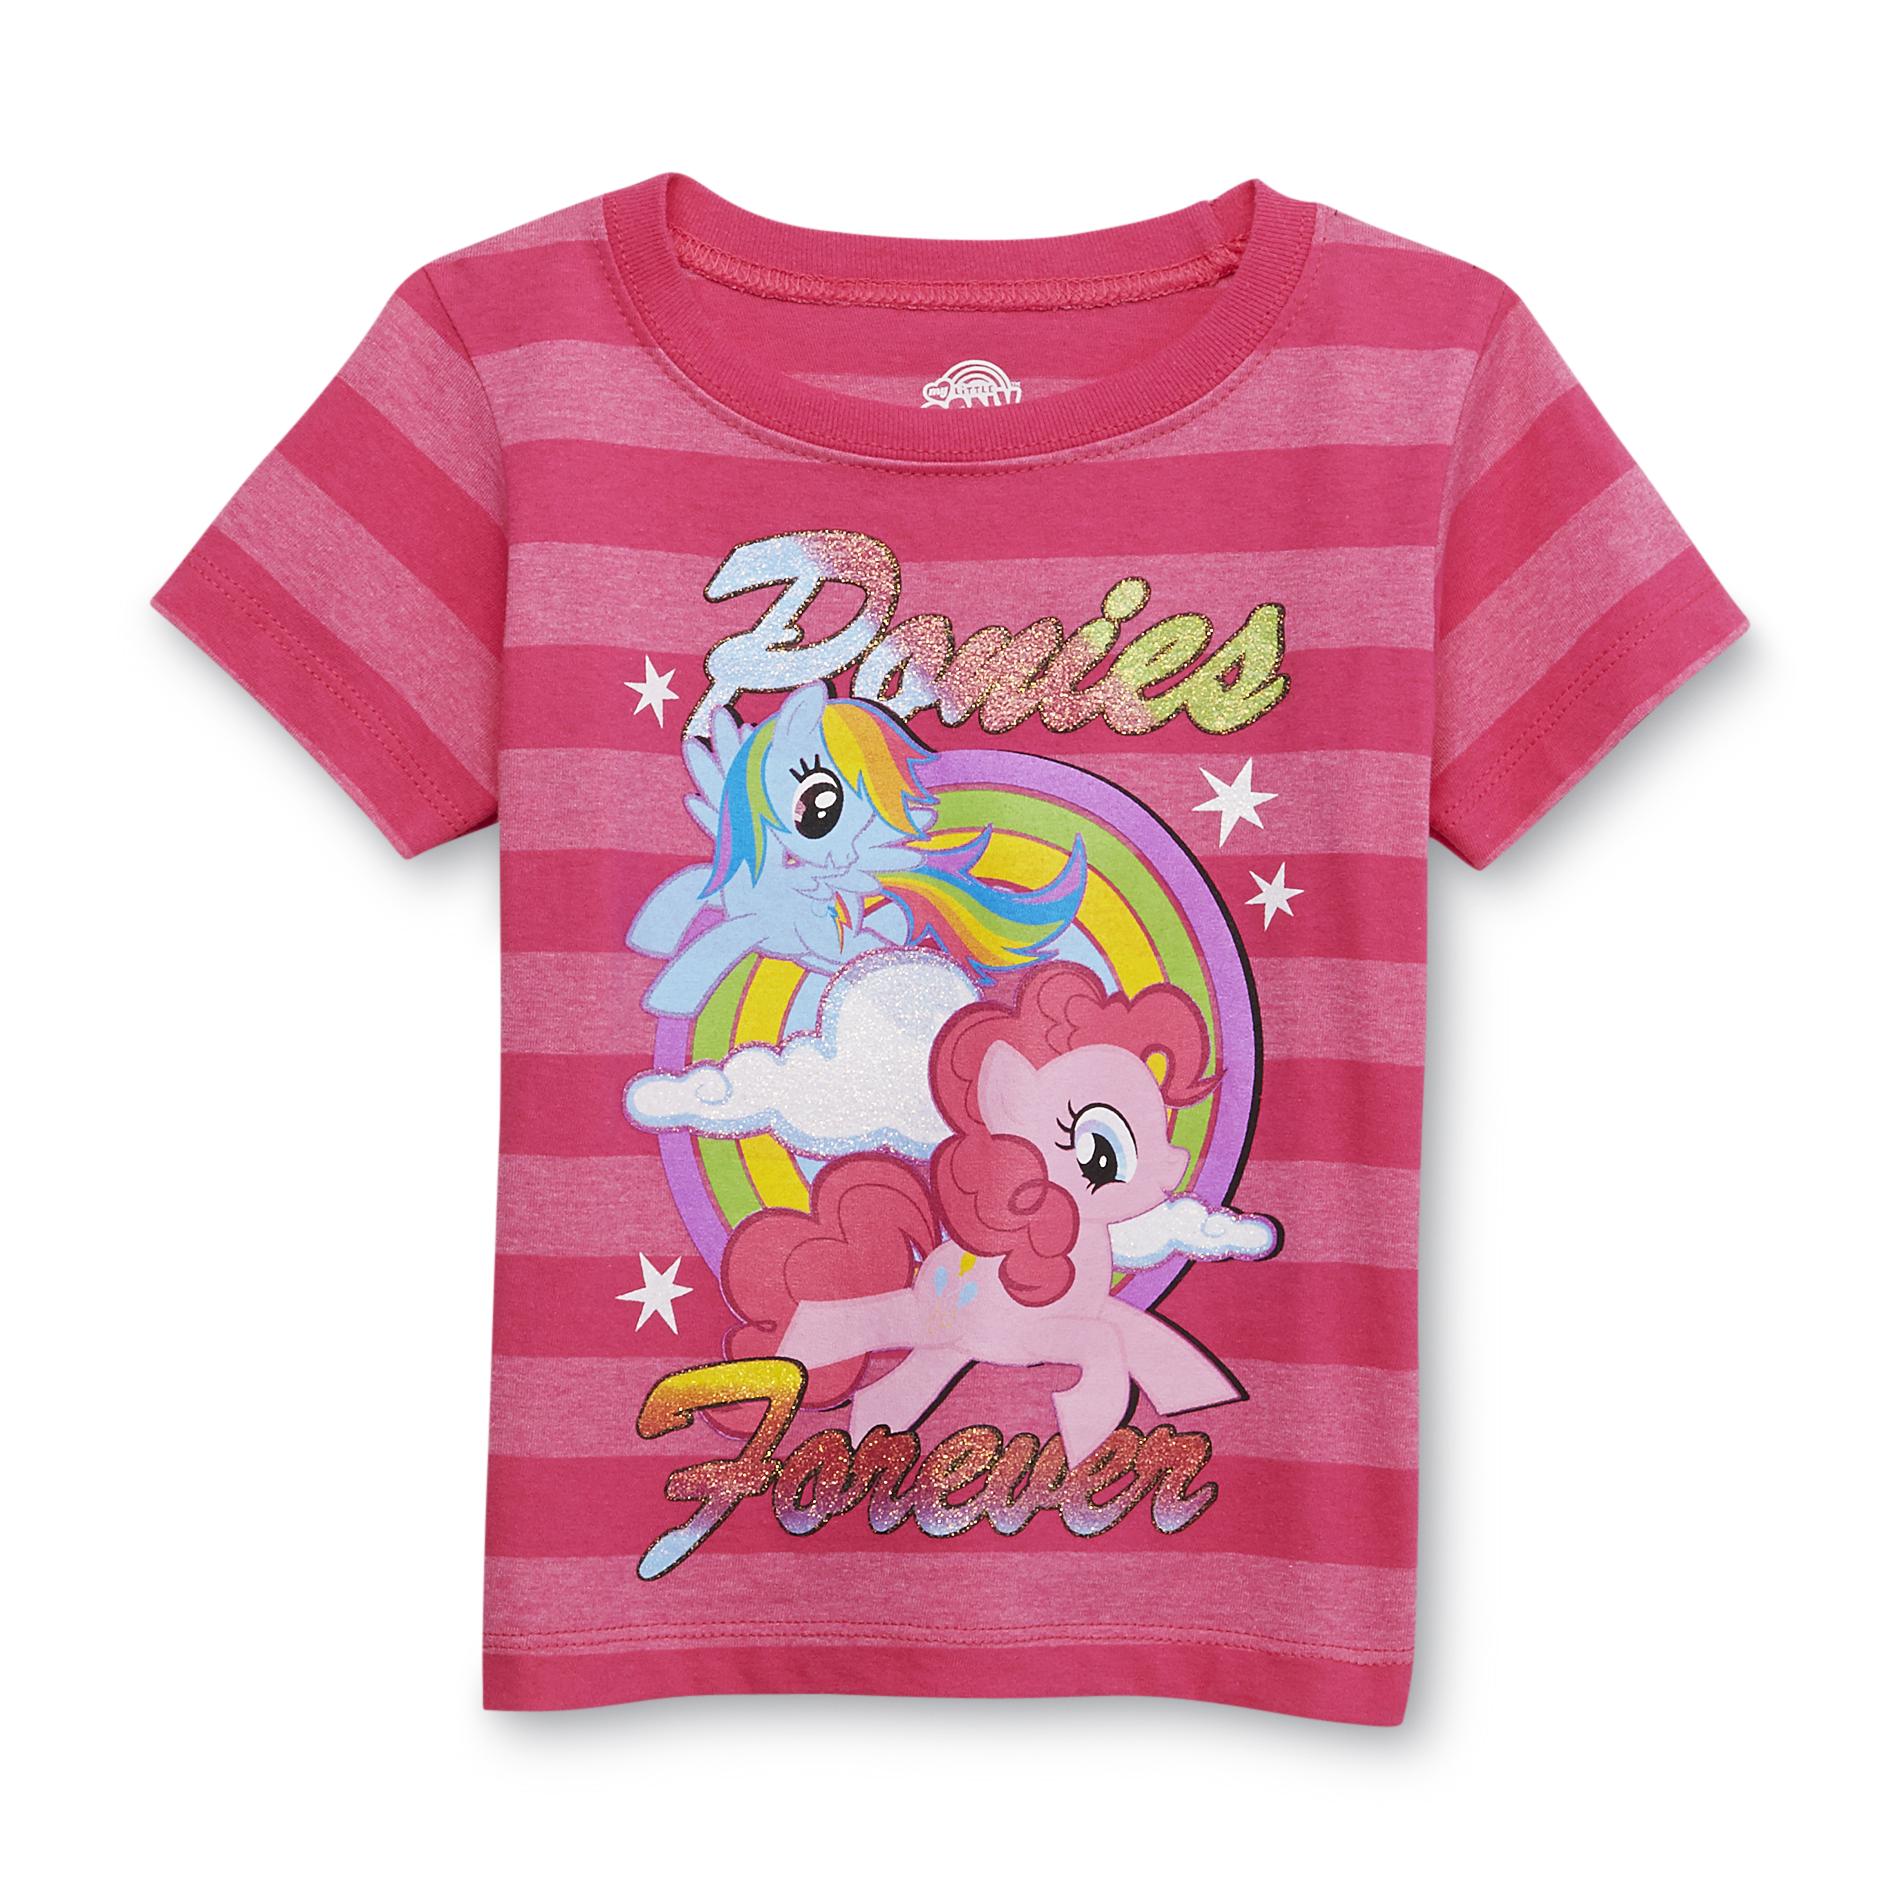 My Little Pony Toddler Girl's Graphic T-Shirt